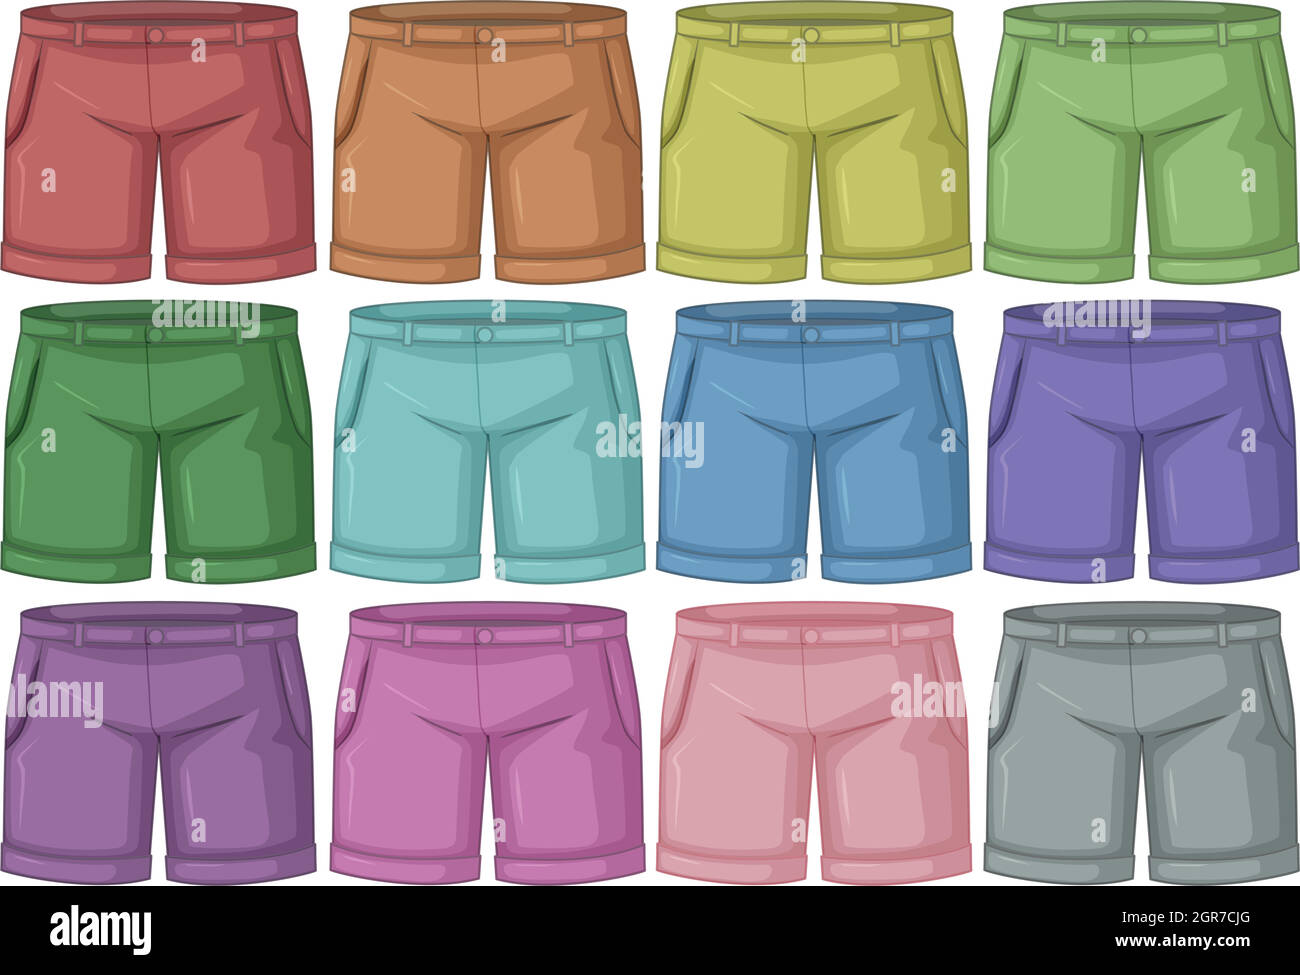 Pants Stock Vector Images - Alamy